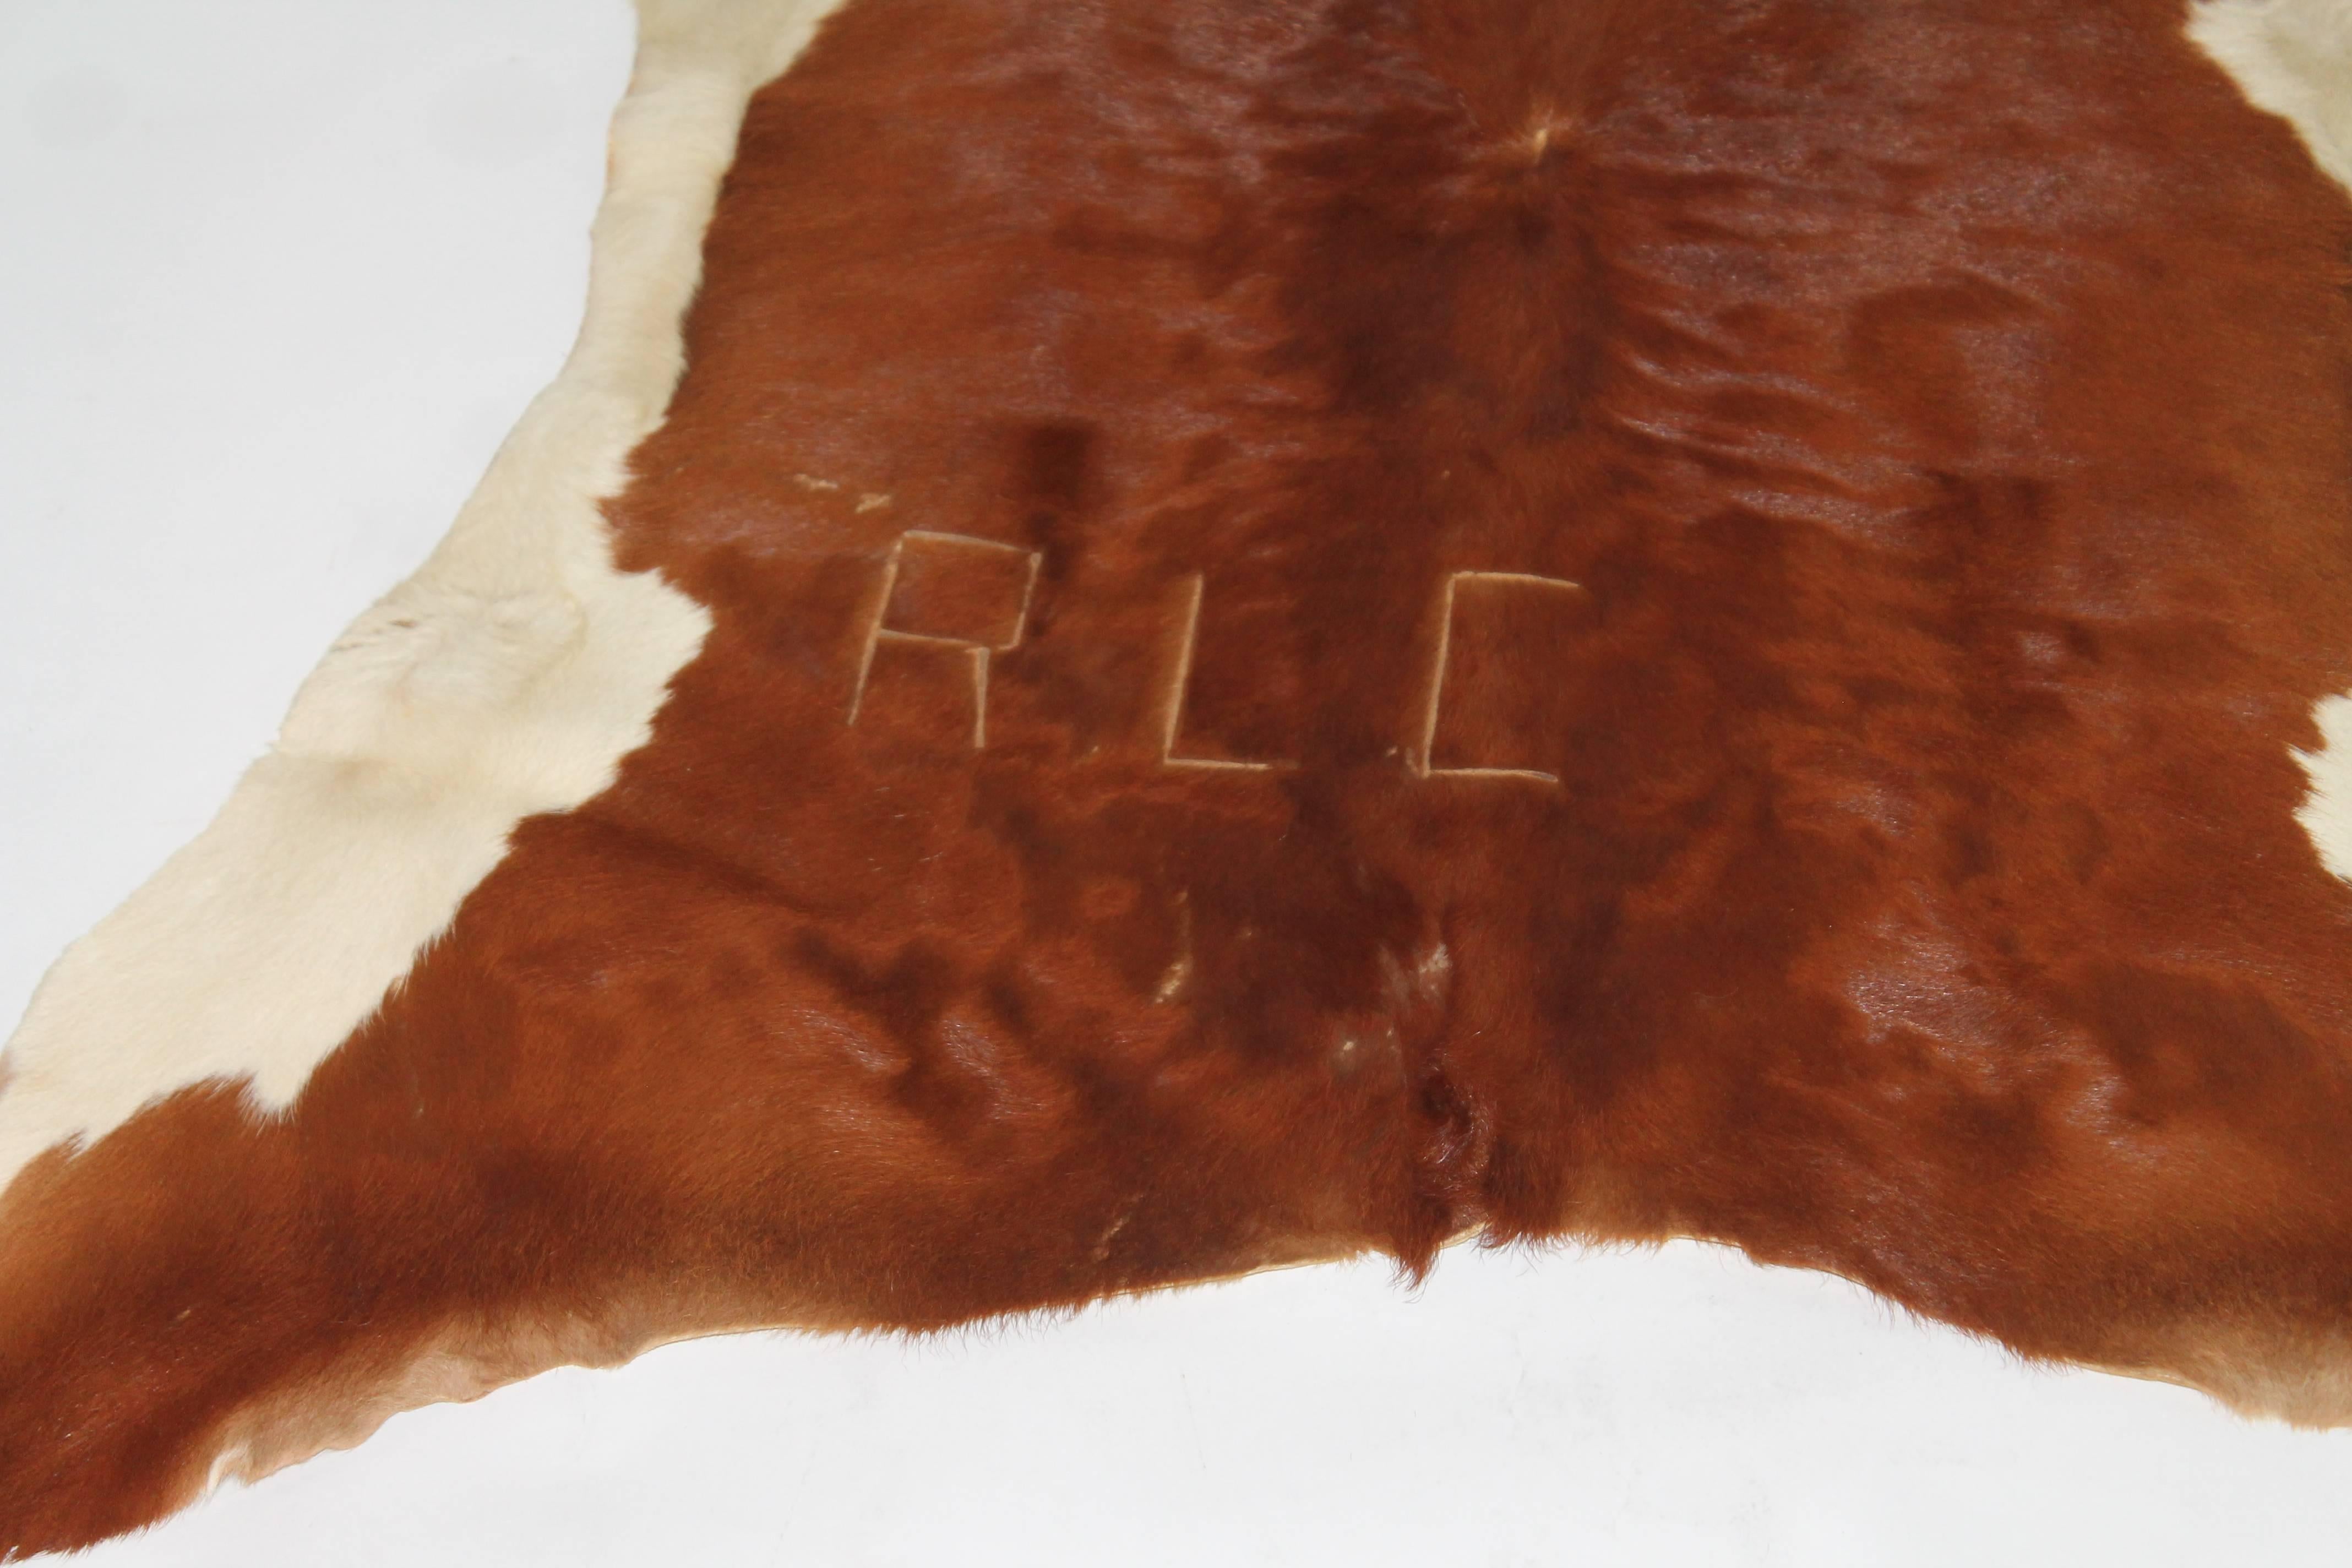 This Fine little calf skin rug is vintage and has branded letters 